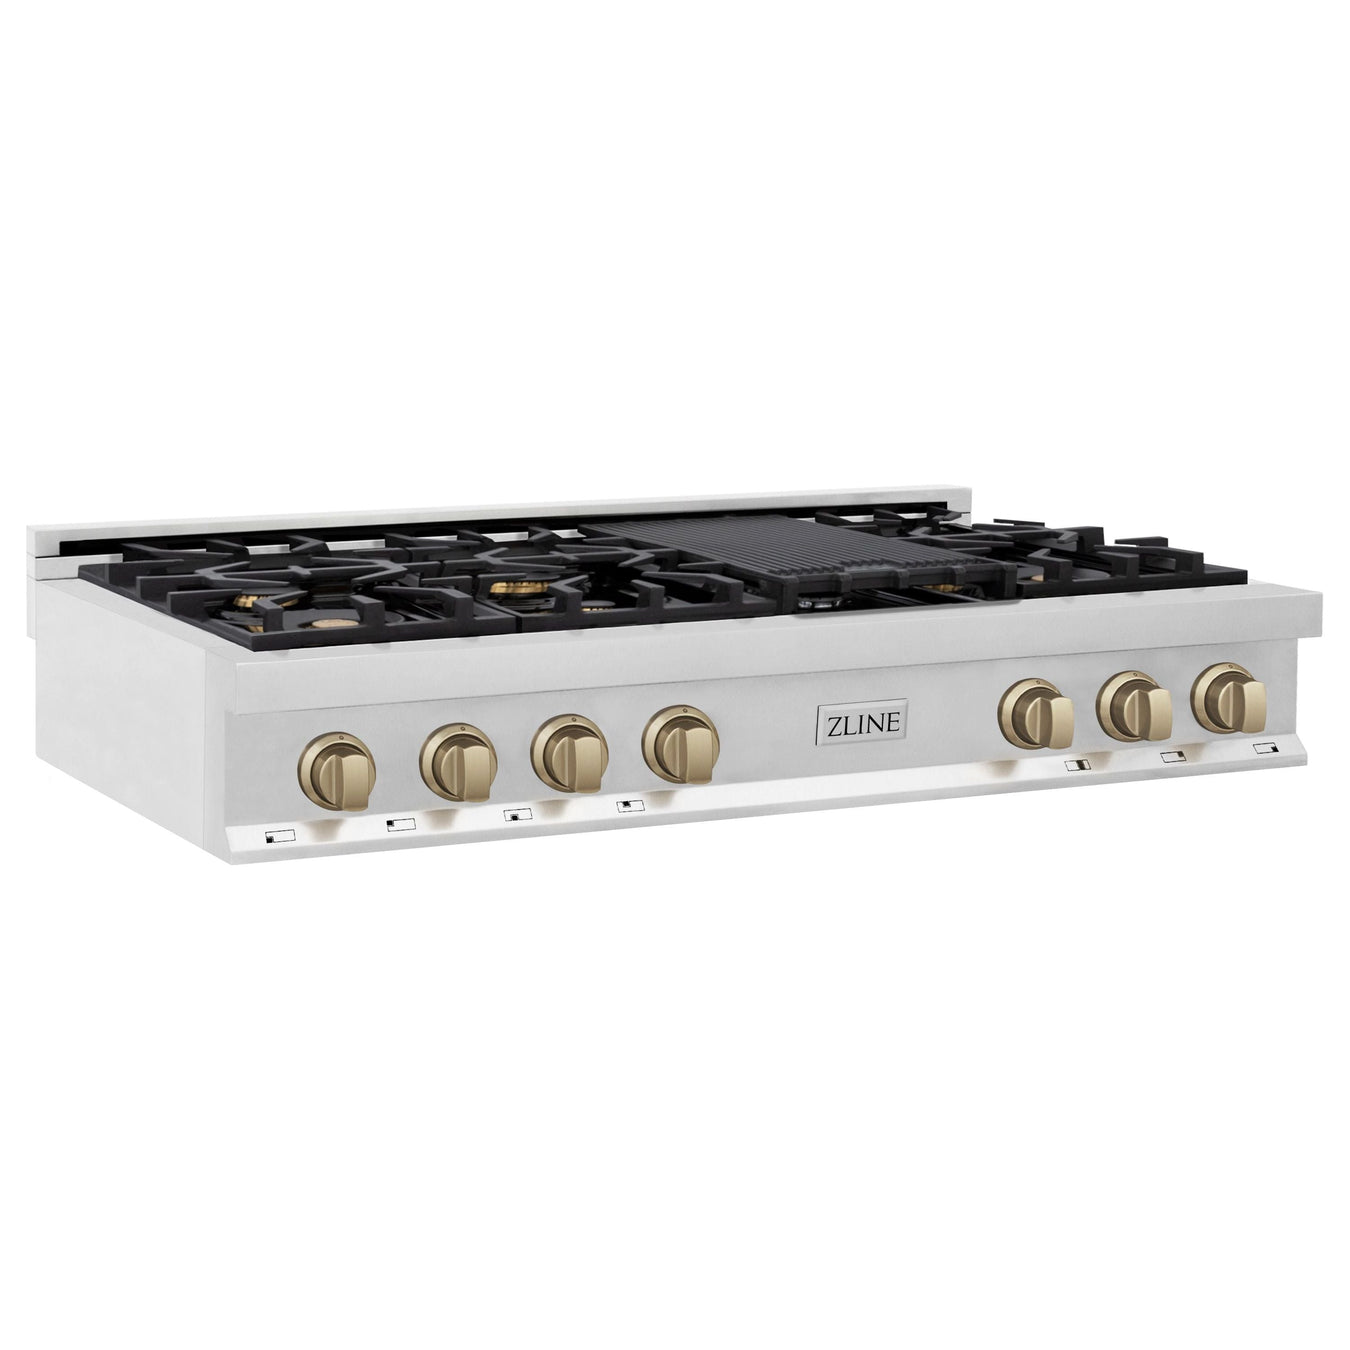 ZLINE Rangetops ZLINE Autograph Edition 48 In. Rangetop with 7 Gas Burners in Stainless Steel and Champagne Bronze Accents, RTZ-48-CB